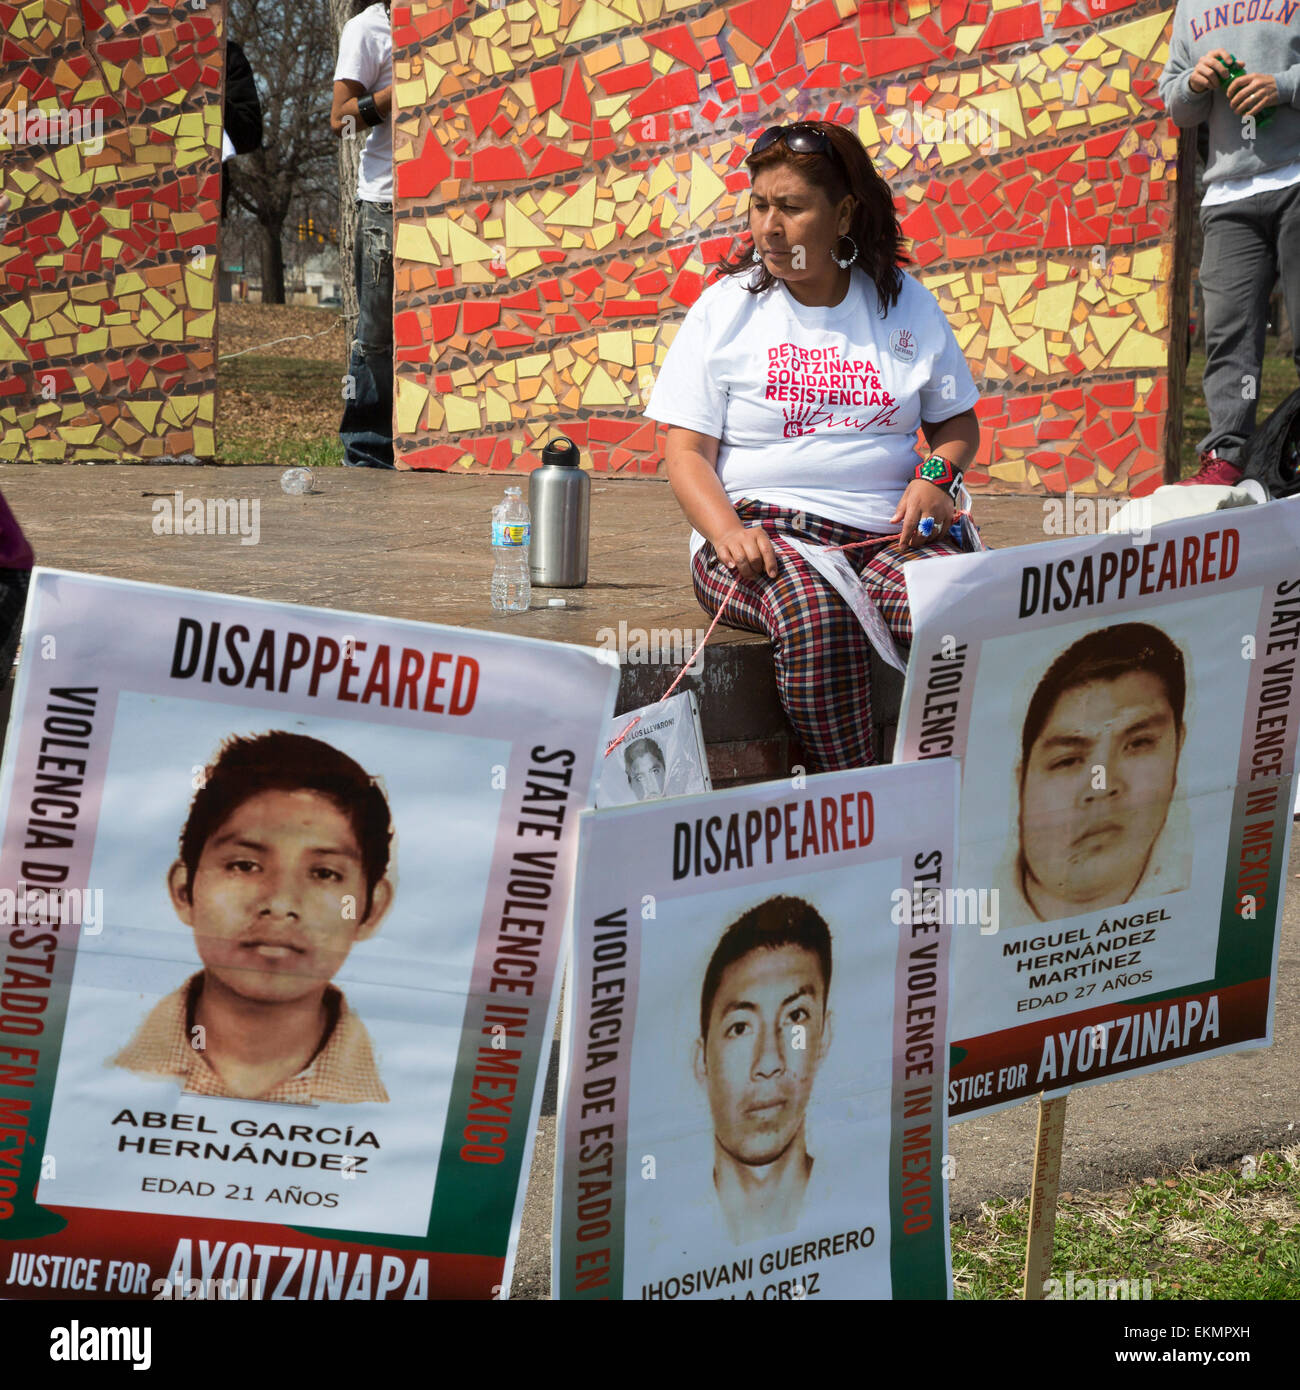 Detroit, Michigan, USA. 12th April, 2015. Maria de Jesus Tlatempa waits to speak at a rally protesting the September 2014 disappearance of 43 teachers college students in the southern Mexican state of Guerrero. The students from Ayotzinapa Teacher Training College were apparently arrested by local police who handed them over to a drug gang. Whe is the mother of disappeared student José Eduardo Bartolo Tlatempa. Relatives of the disappeared are traveling to cities across the U.S. to tell their story. Credit:  Jim West/Alamy Live News Stock Photo